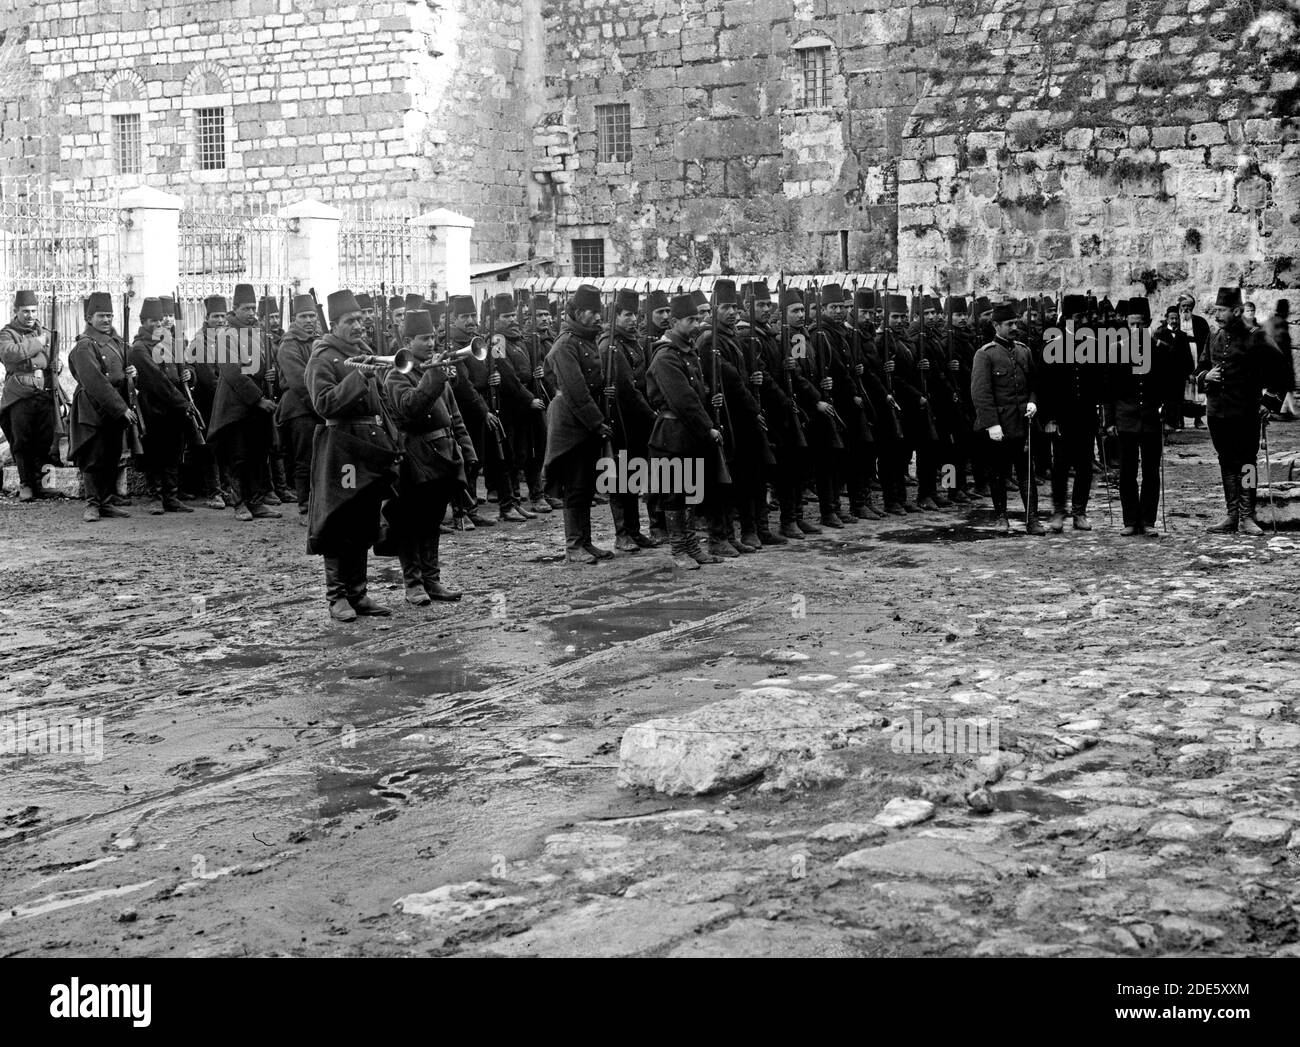 Middle East History - Turk. Mili drill beside Ch. of Nat. [i.e. Turkish military drill beside the Church of the Nativity] Stock Photo